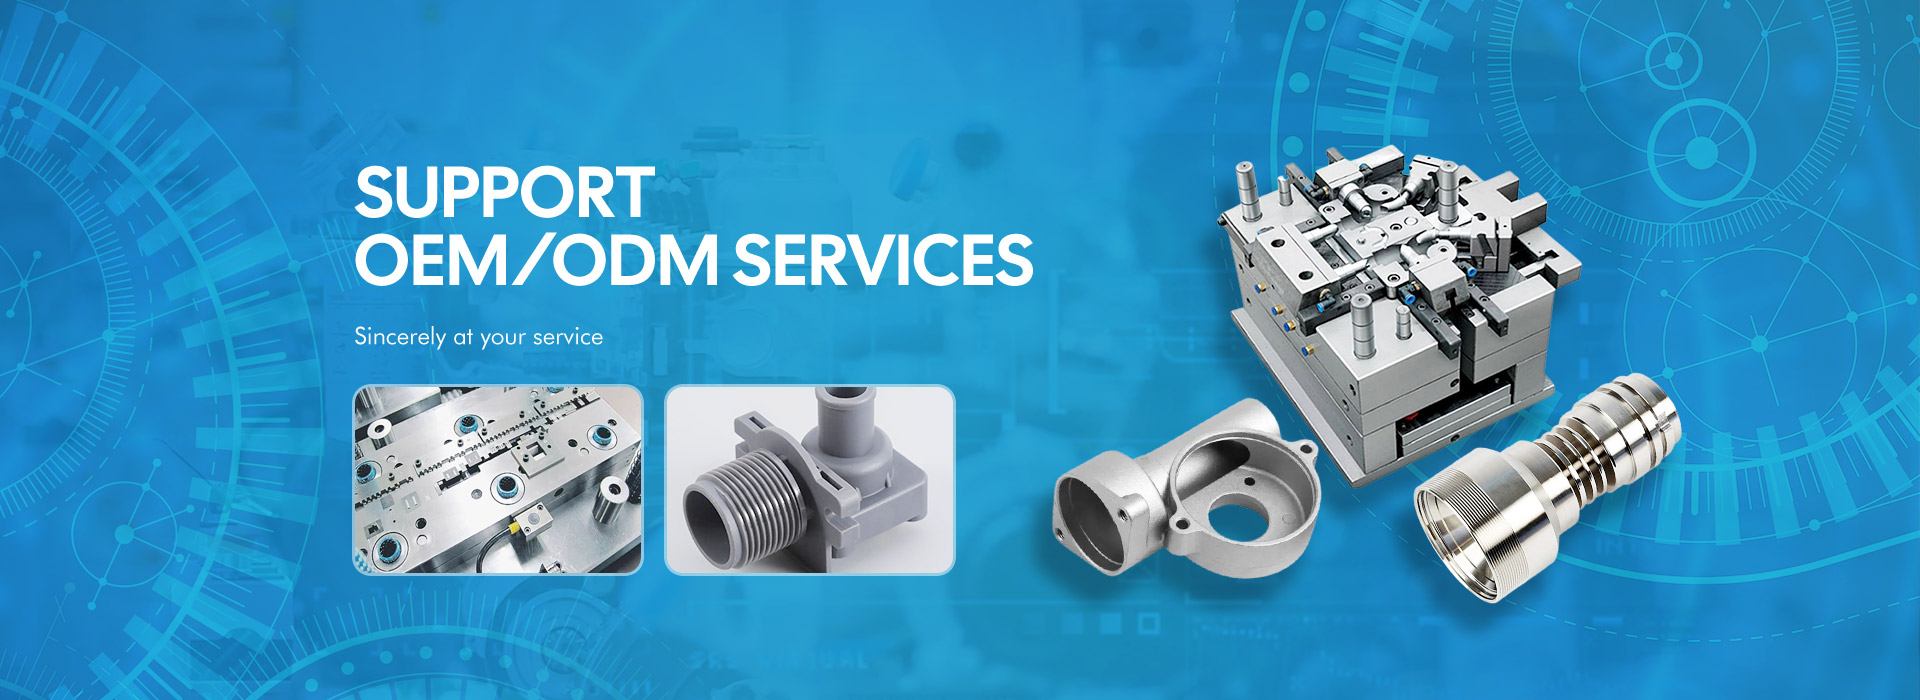 Support OEM/ODM Services